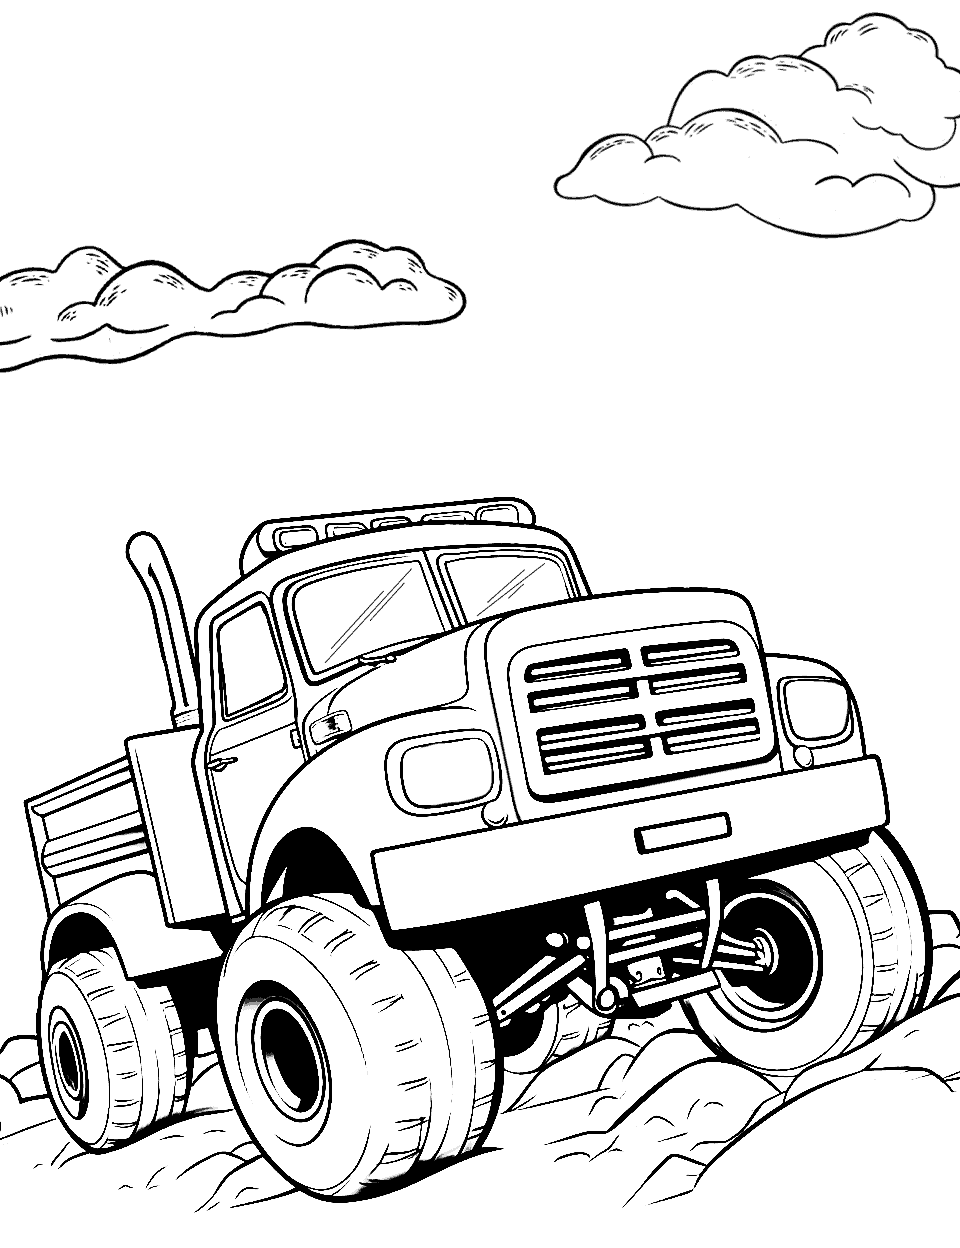 Playful Monster Truck Coloring Page - A playful monster truck bouncing on large, dirt hills.